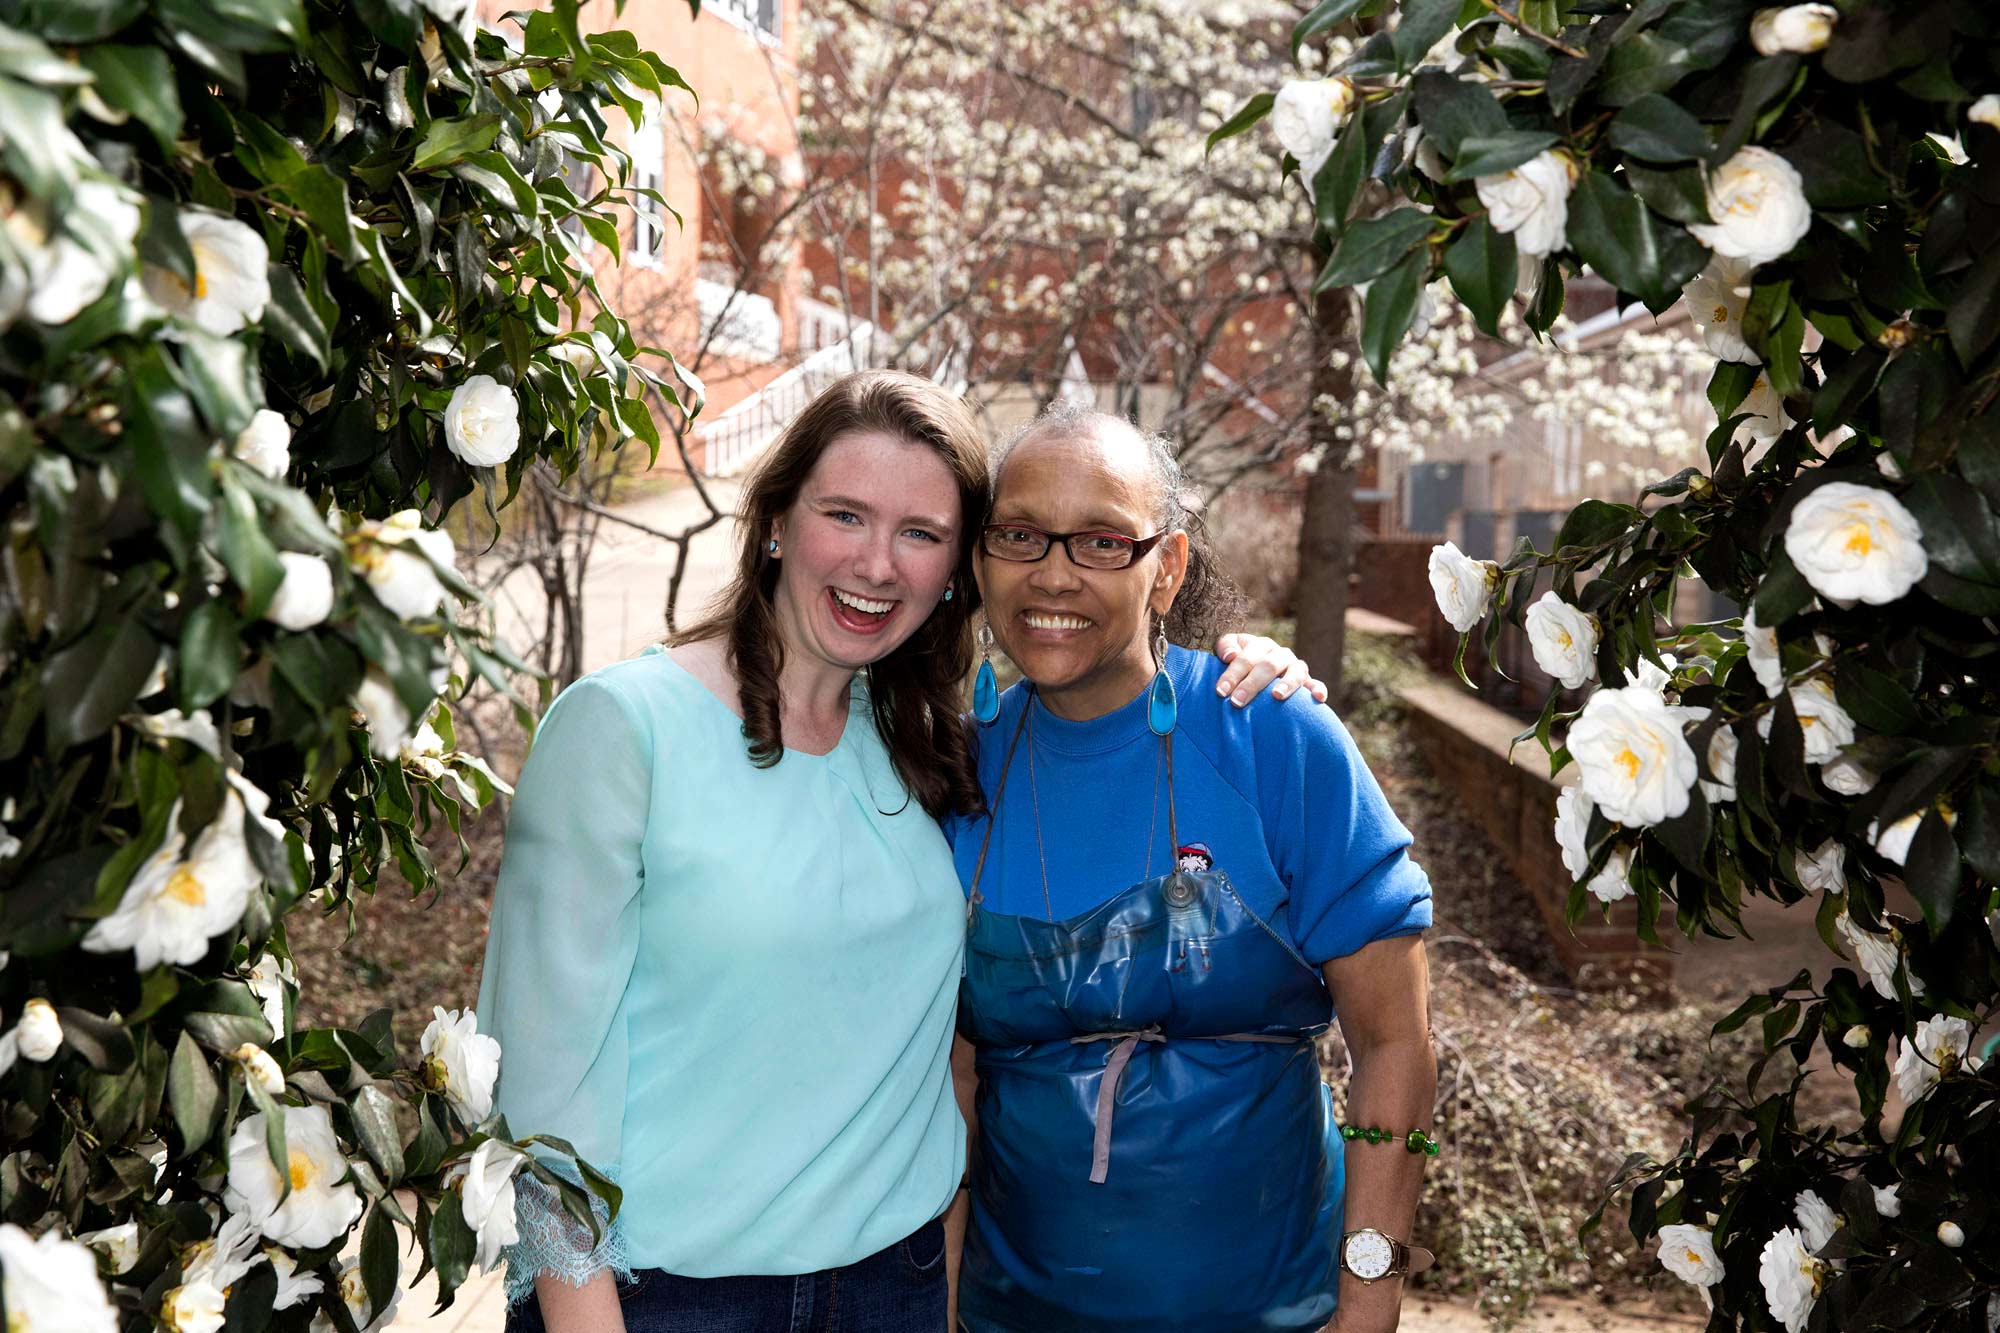 Maeve Curtin and Linda Miles stand between flowers smiling for the camera